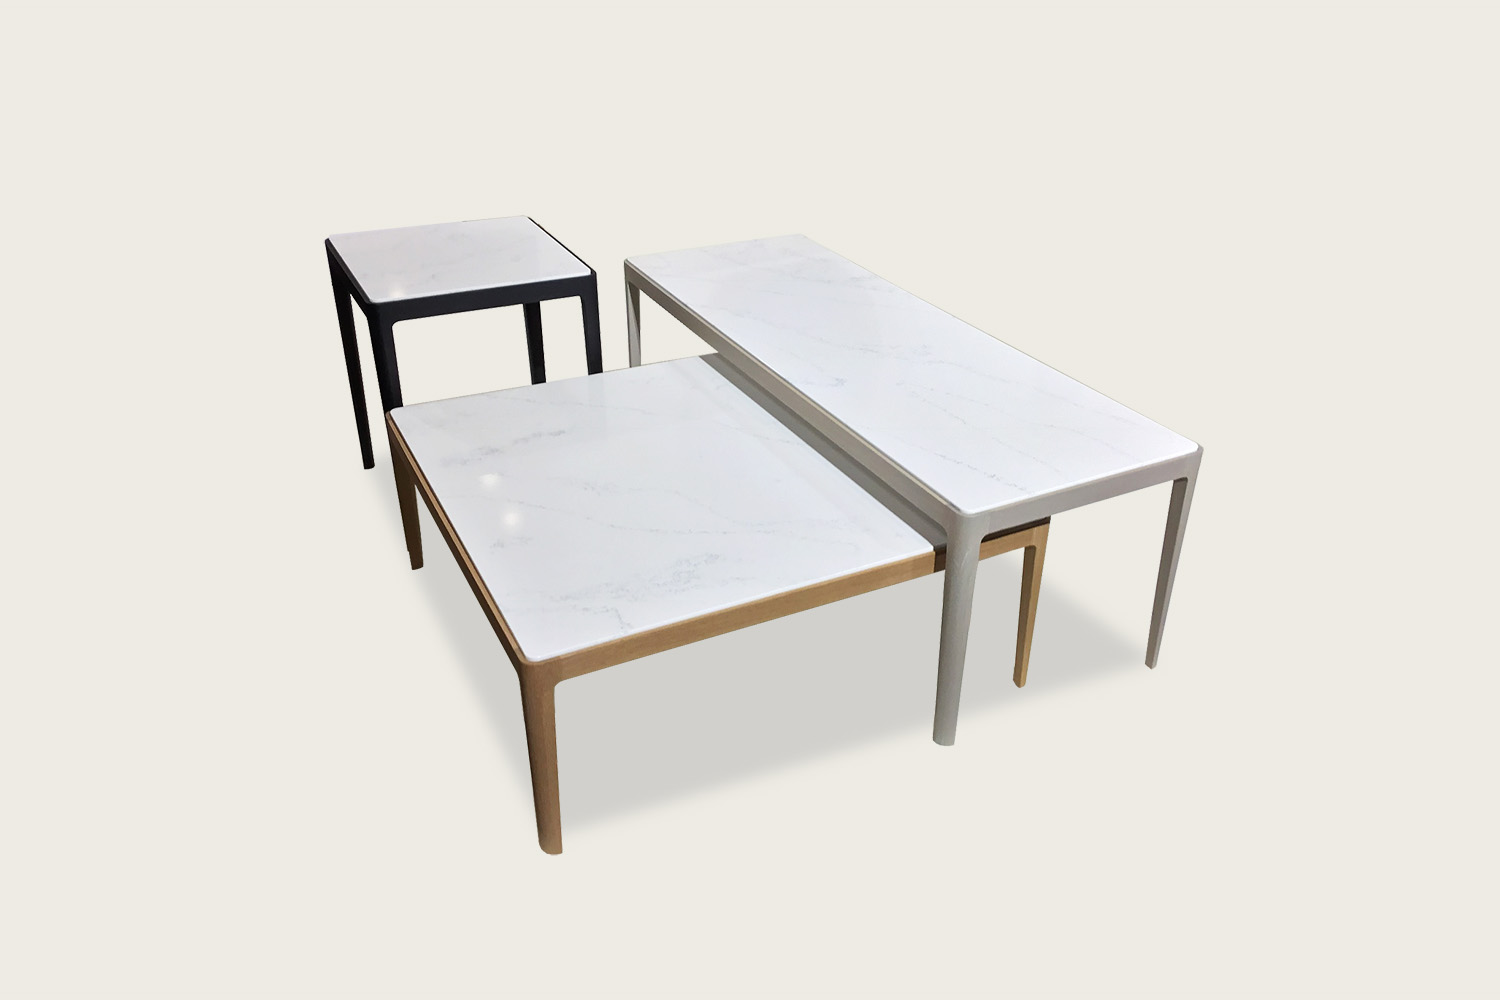 Stadia Coffee Tables in solid oak with quartz tops - Speke Klein